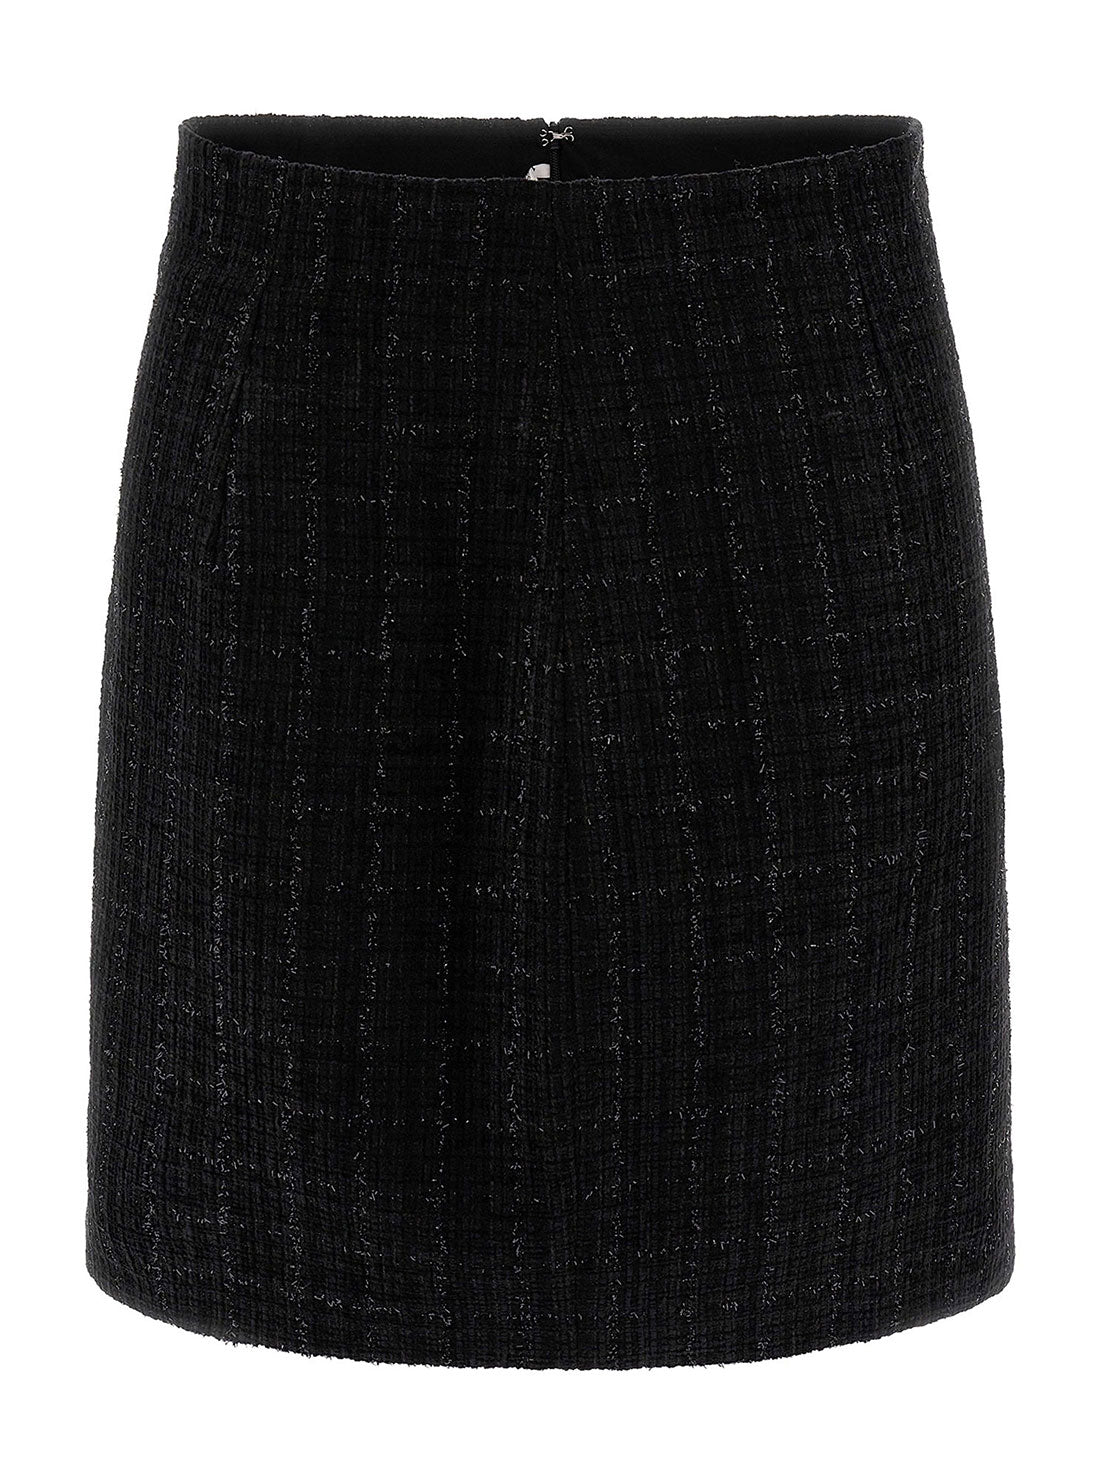 GUESS Women's Black Emma Shimmer Tweed Mini Skirt W3RD41WF5A0 Ghost View